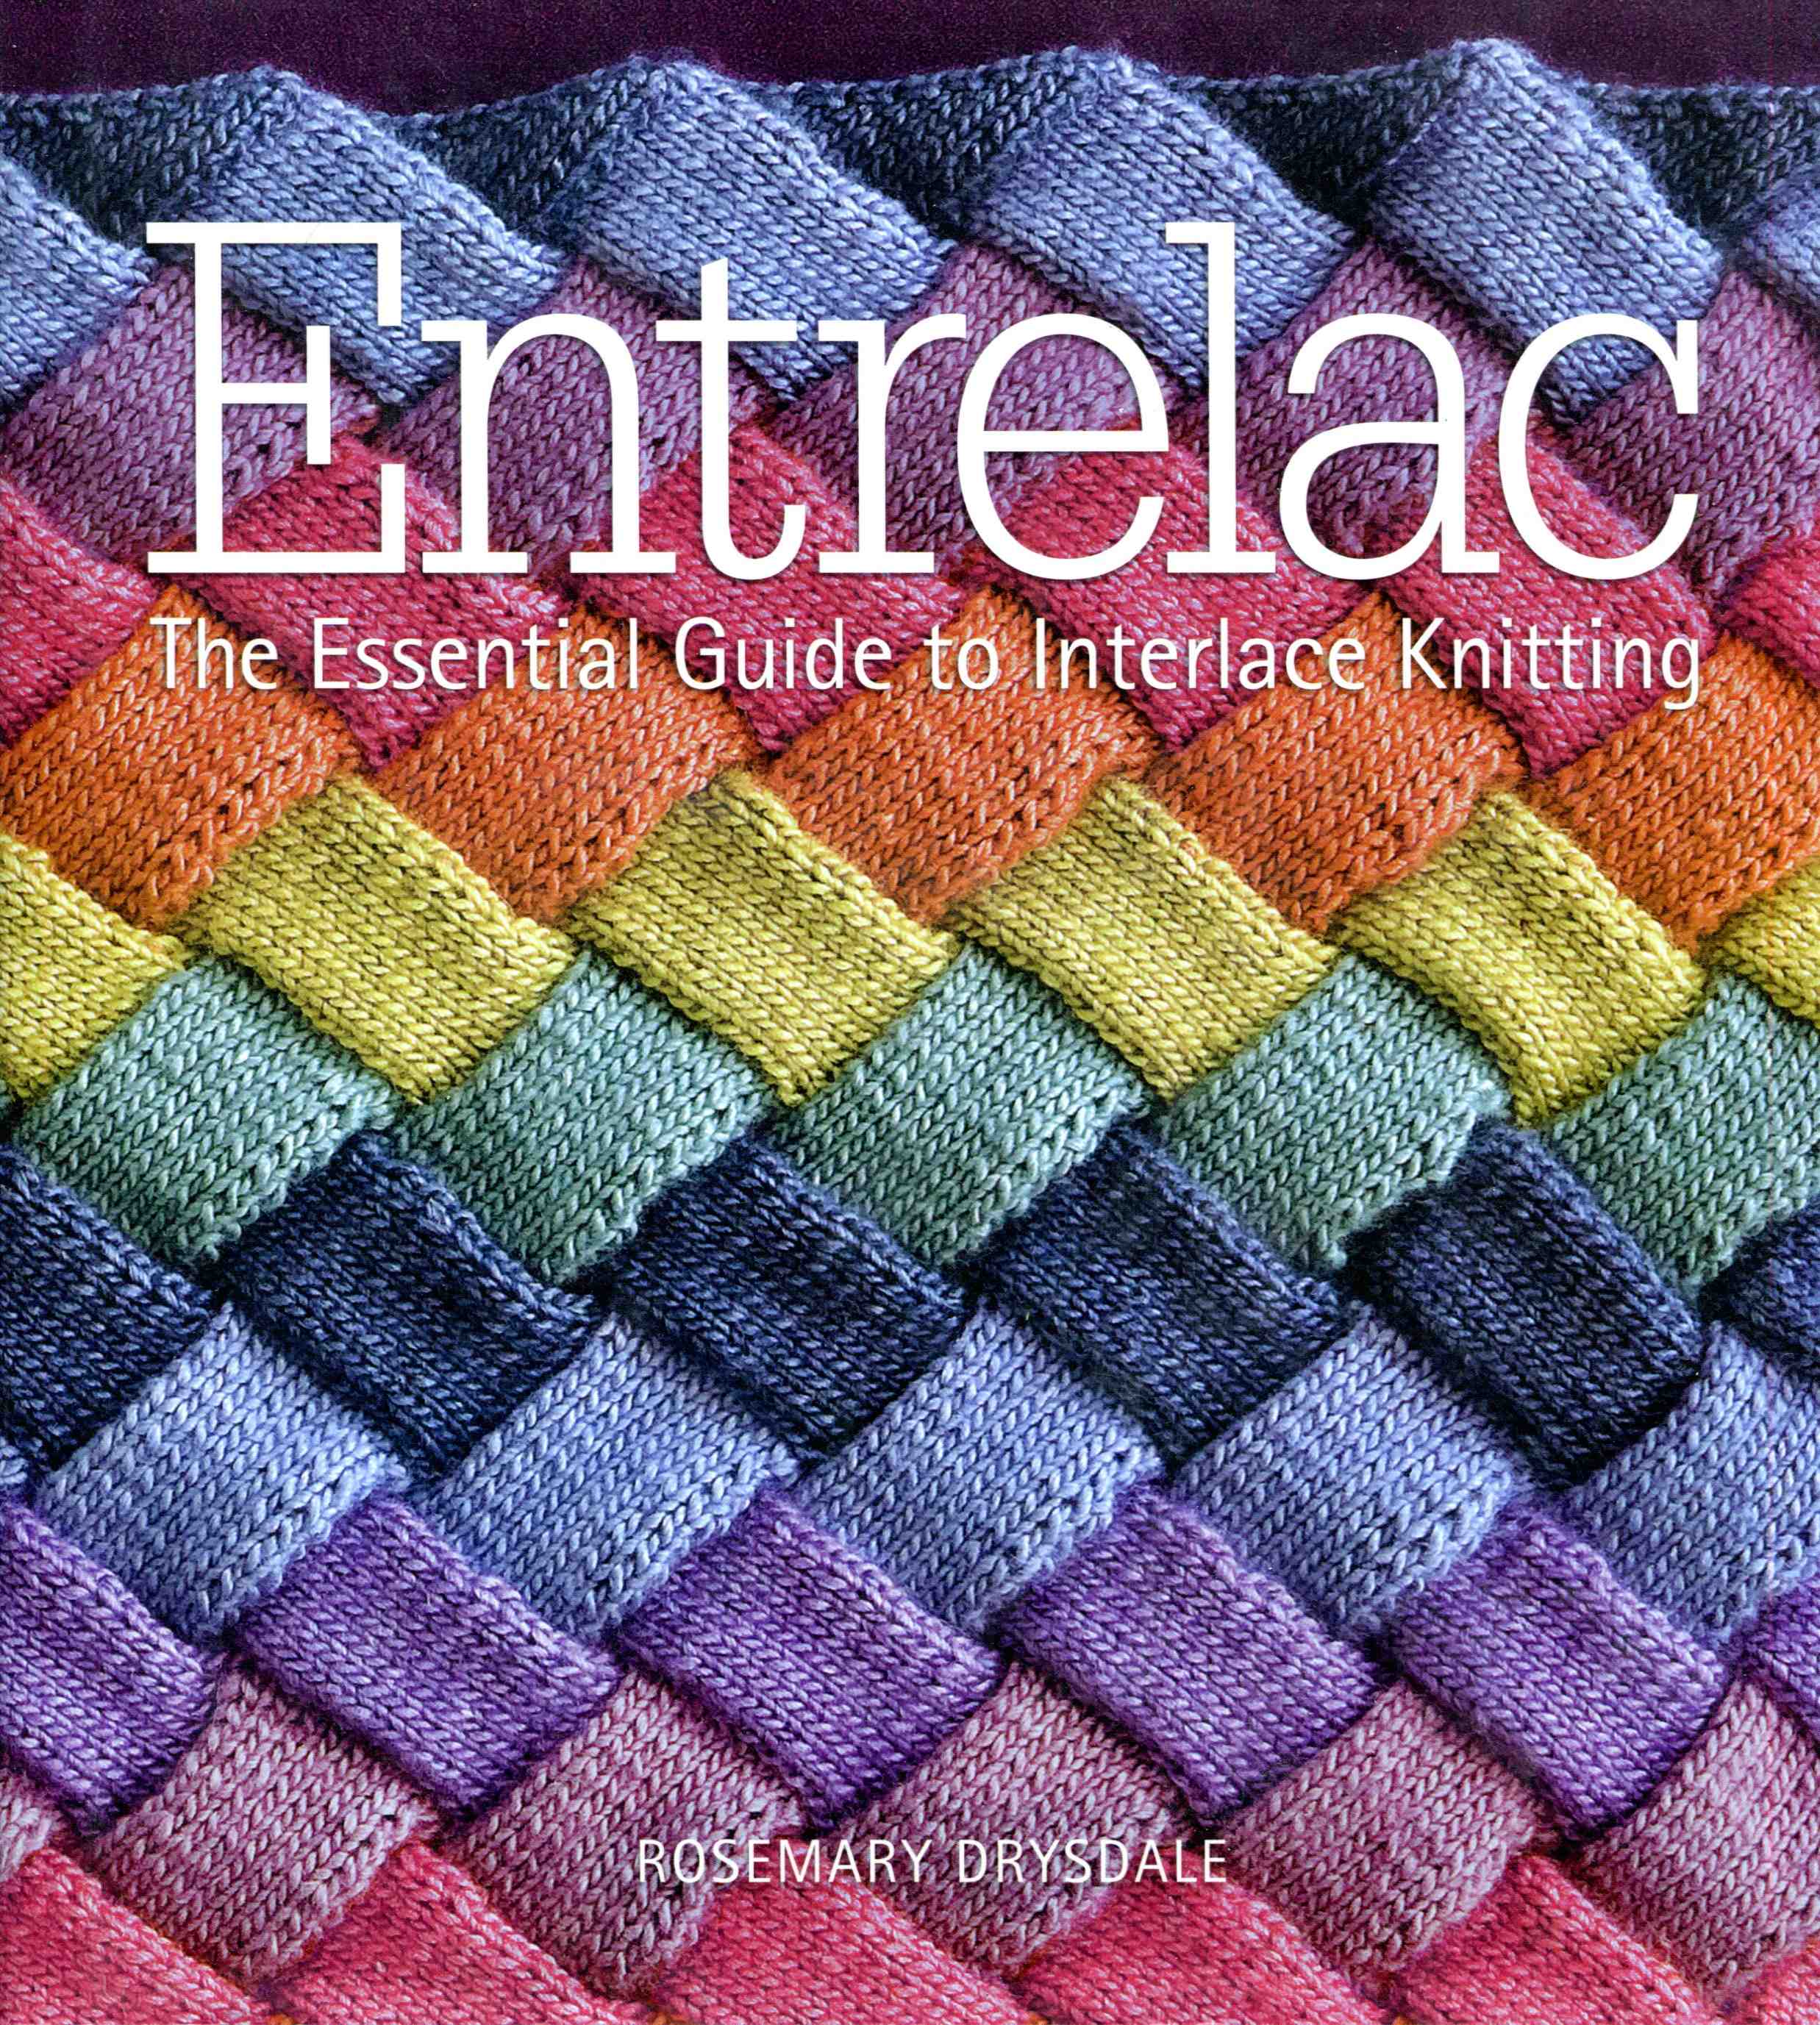 Entrelac by Rosemary Drysdale